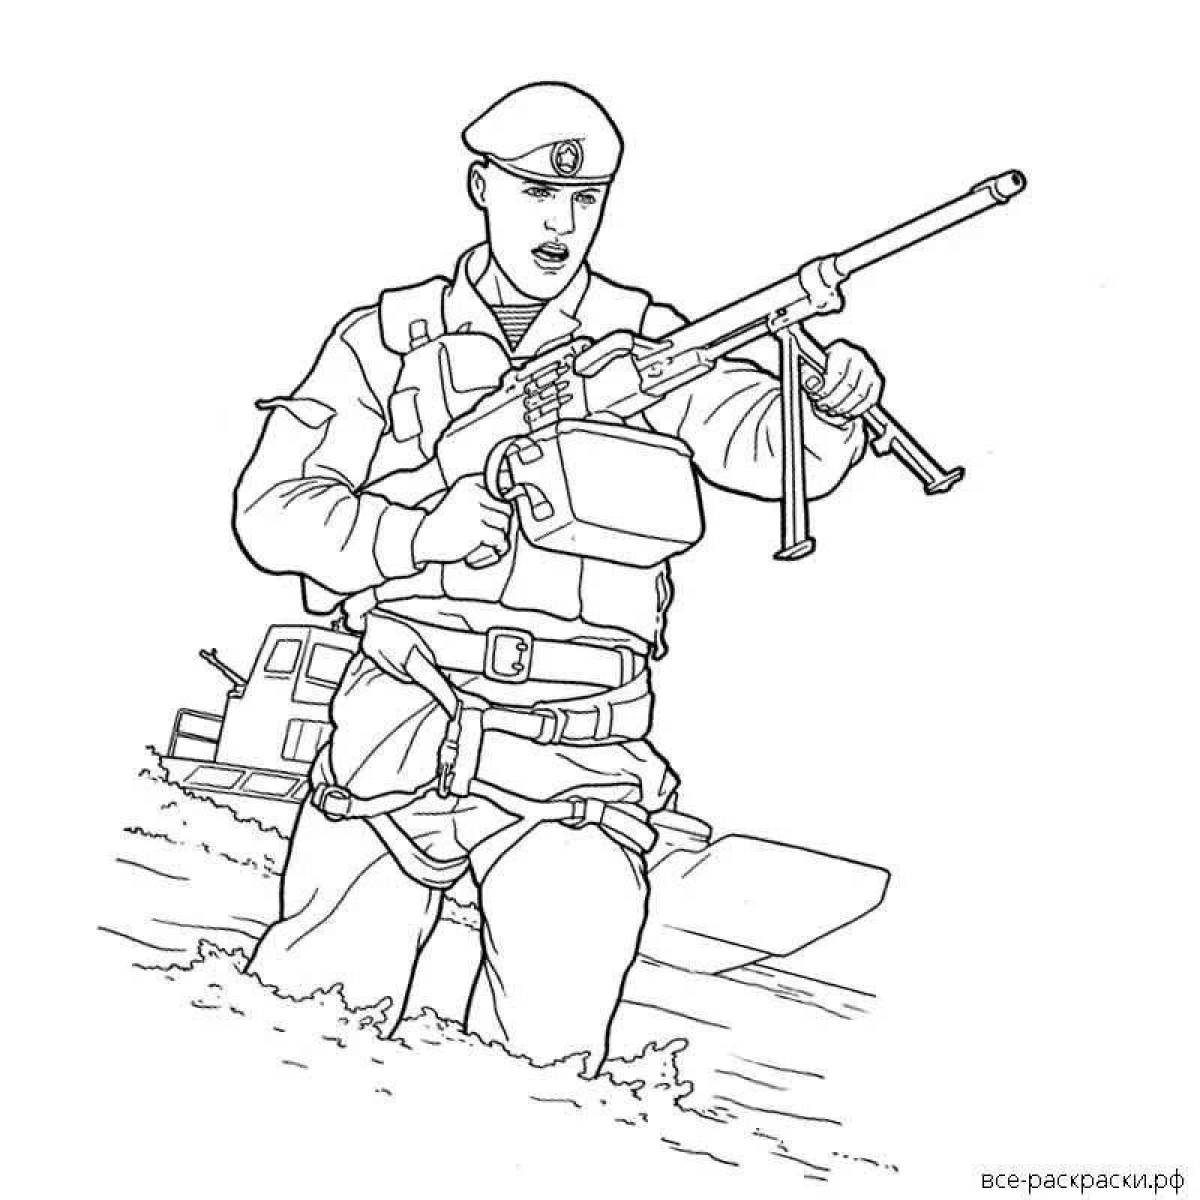 Amazingly gorgeous Russian soldier coloring book